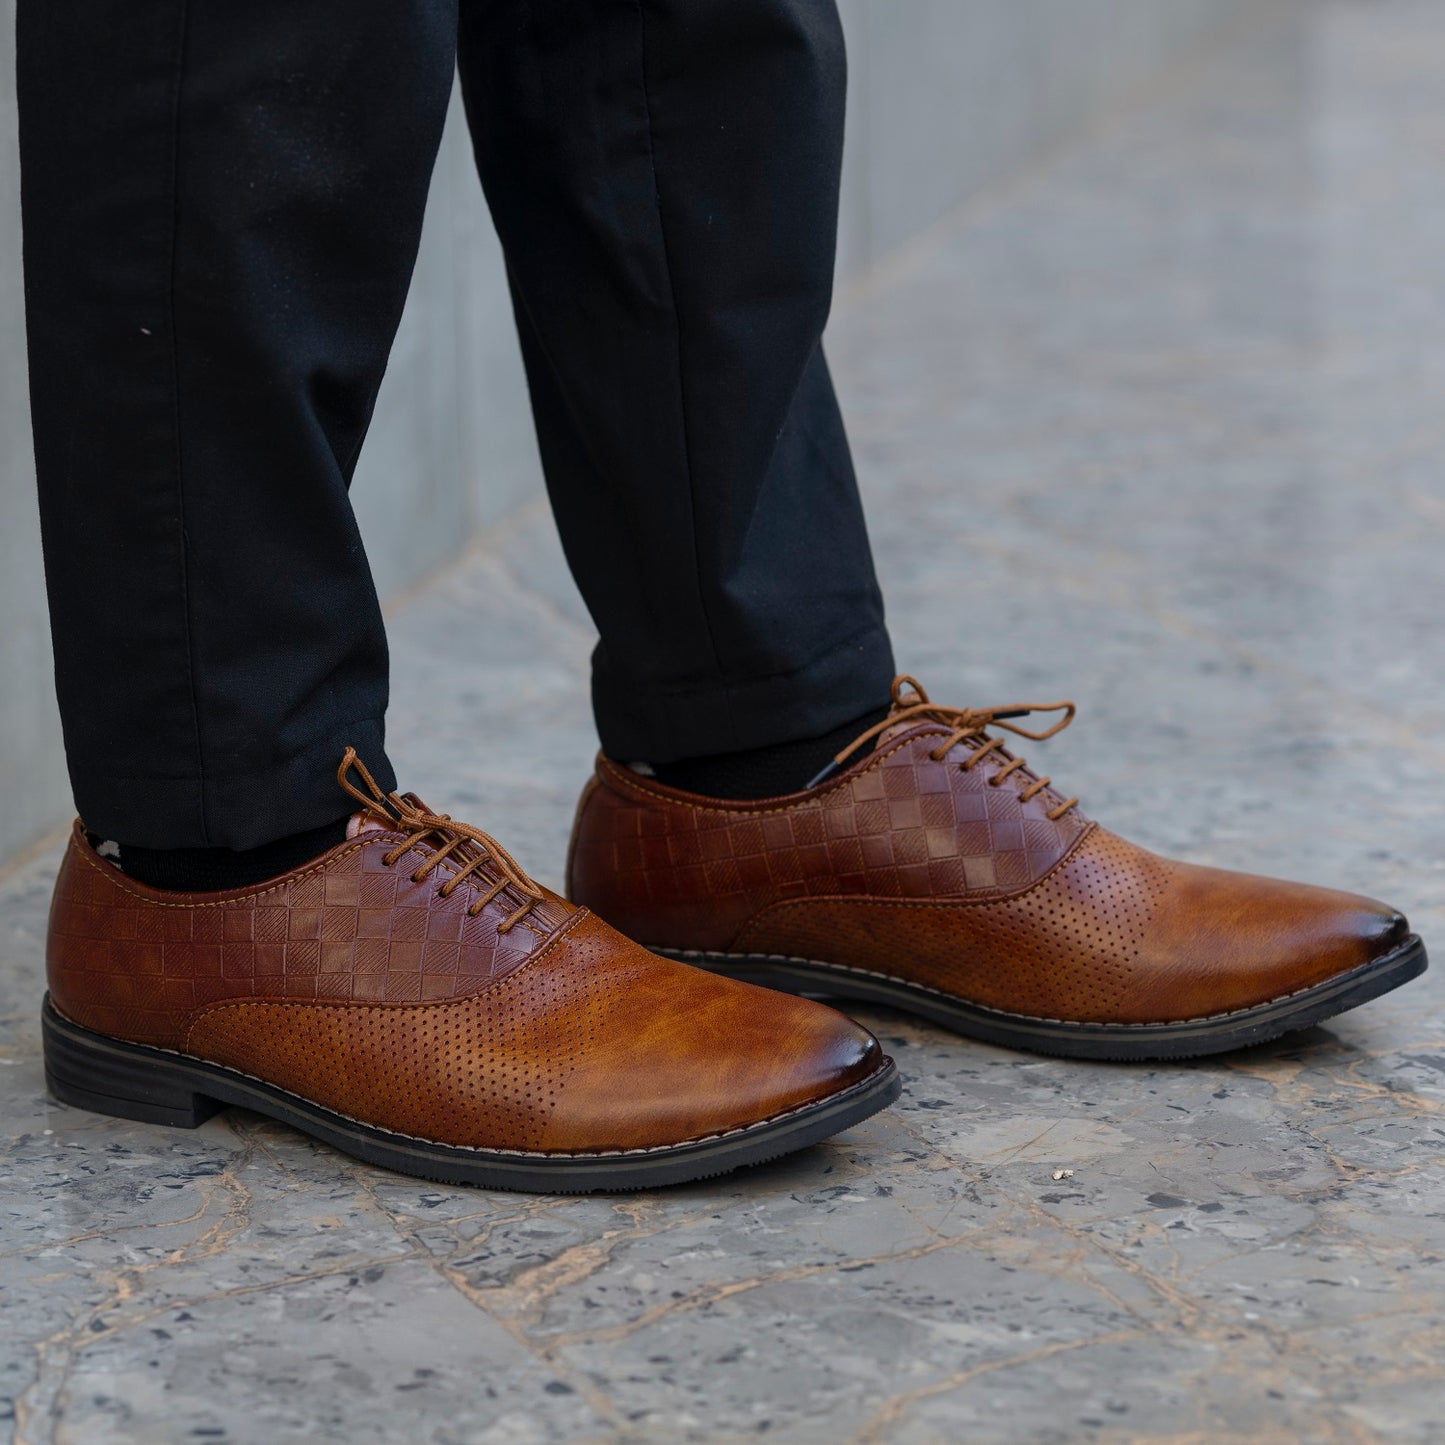 The Aurous Athens Oxford Formal Laceup Derby Shoes With Dotted Texture